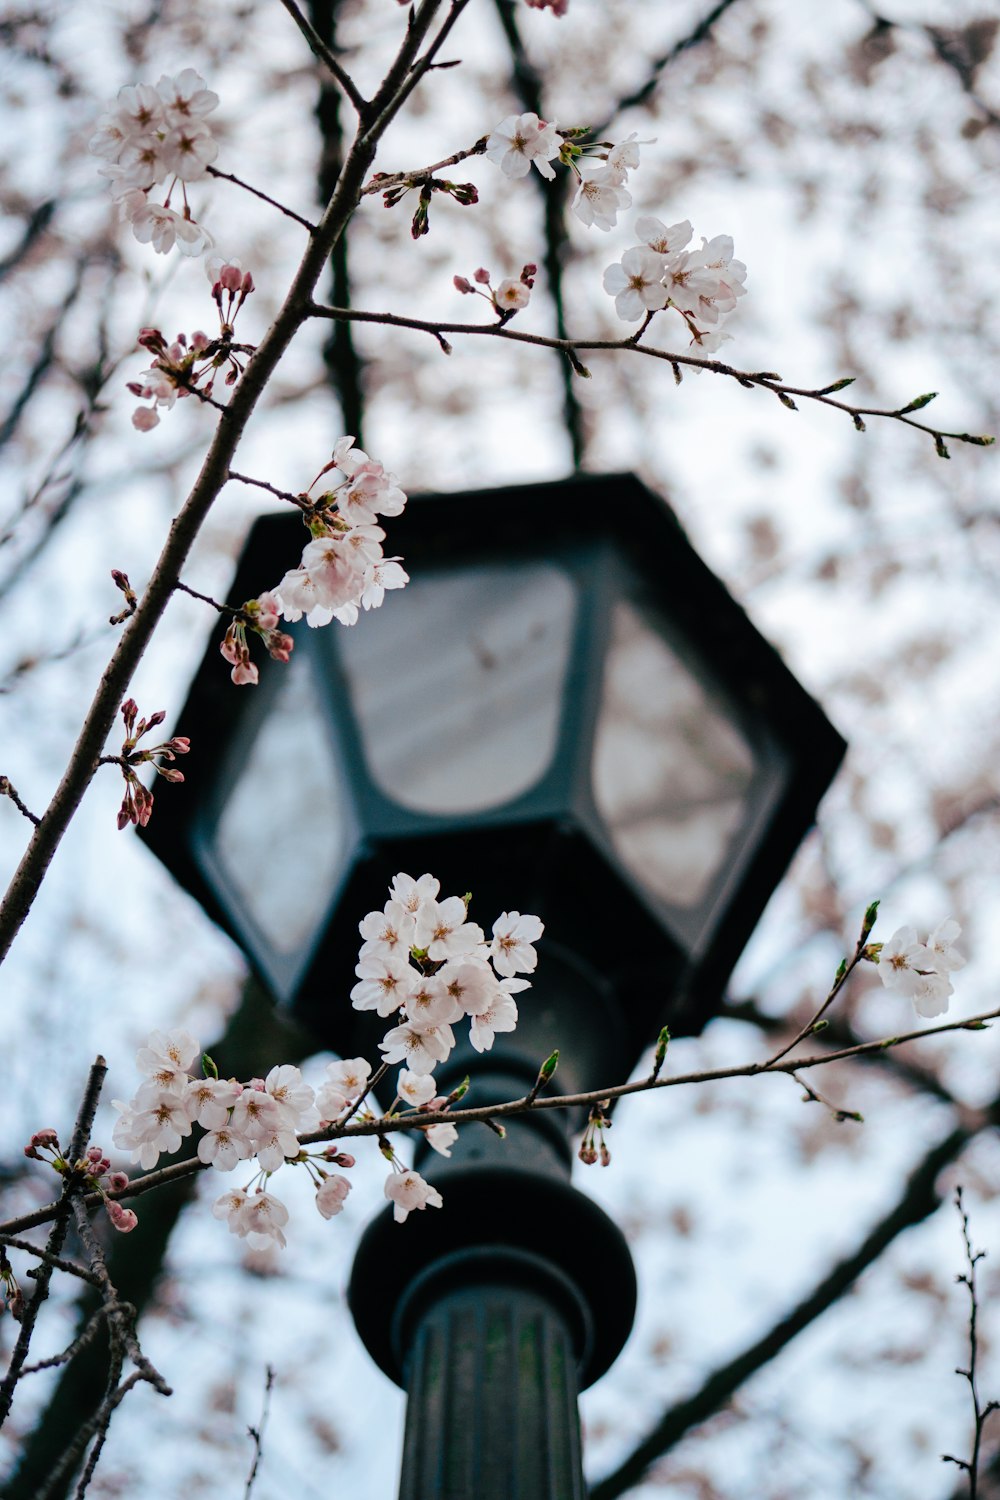 a lamp post with a light and flowers on it